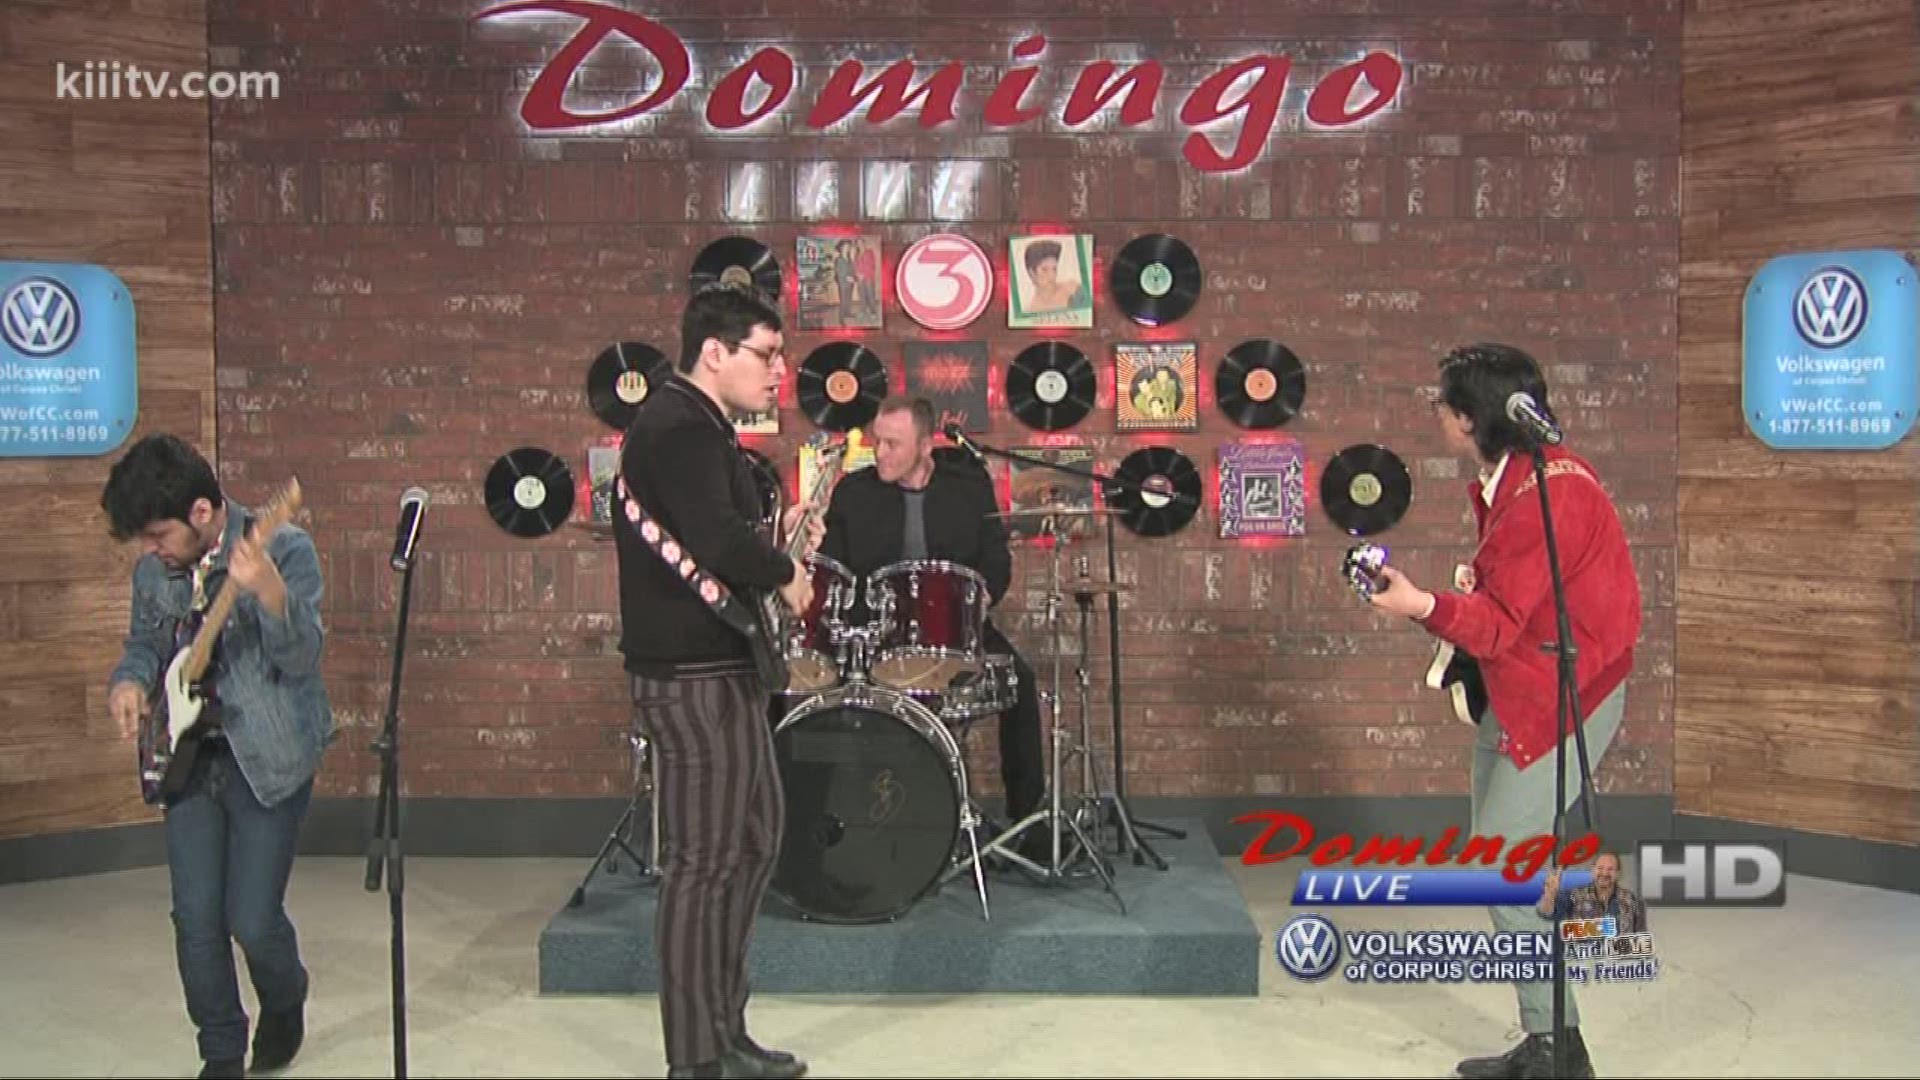 The Blind Owls performing "Something About That Girl" on Domingo Live.